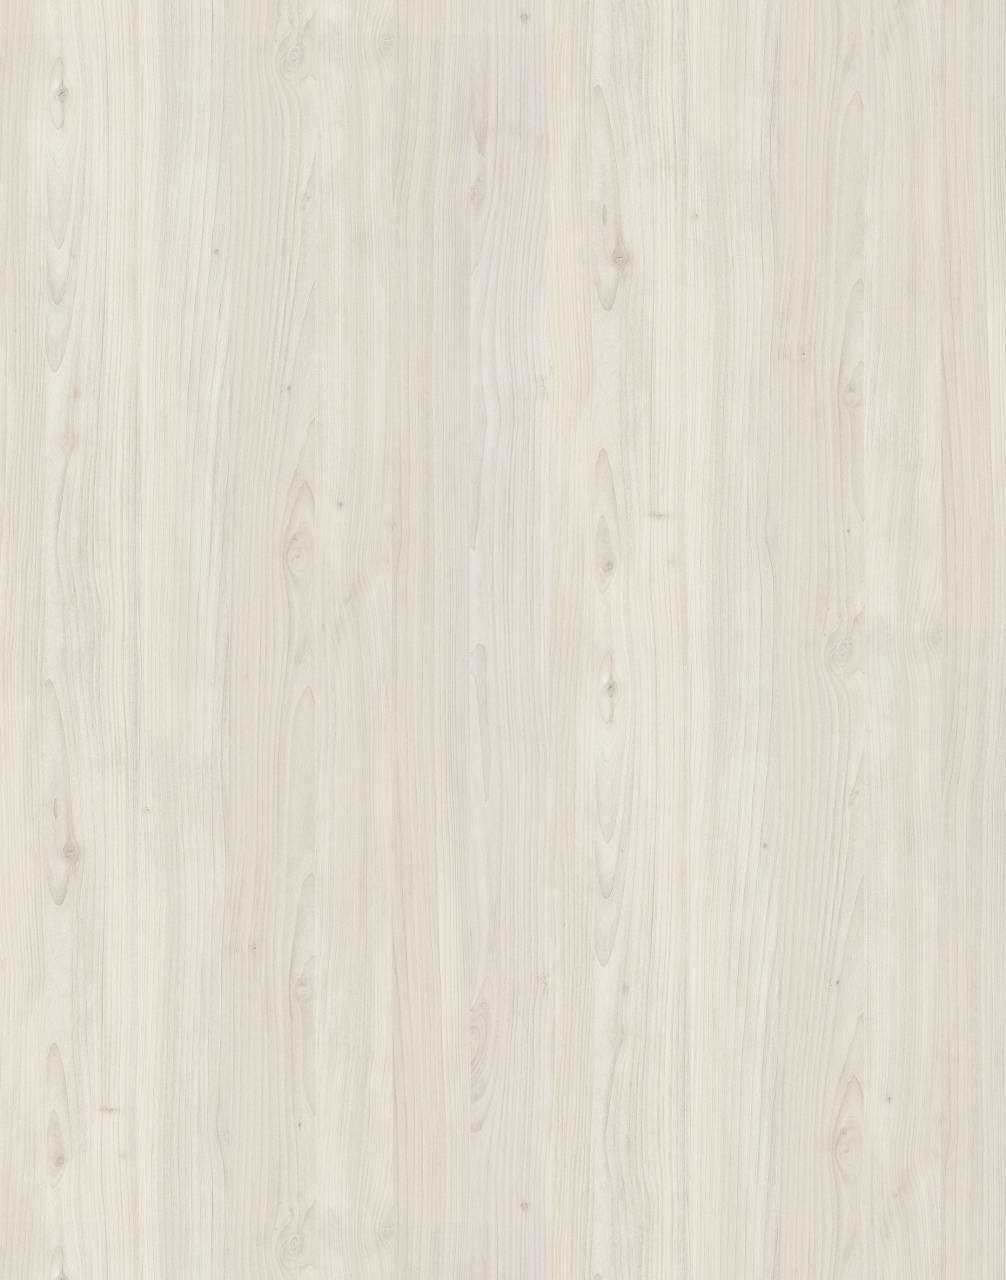 White Nordic Wood PW HPL with textured surface and clean light tones for a contemporary and fresh look.